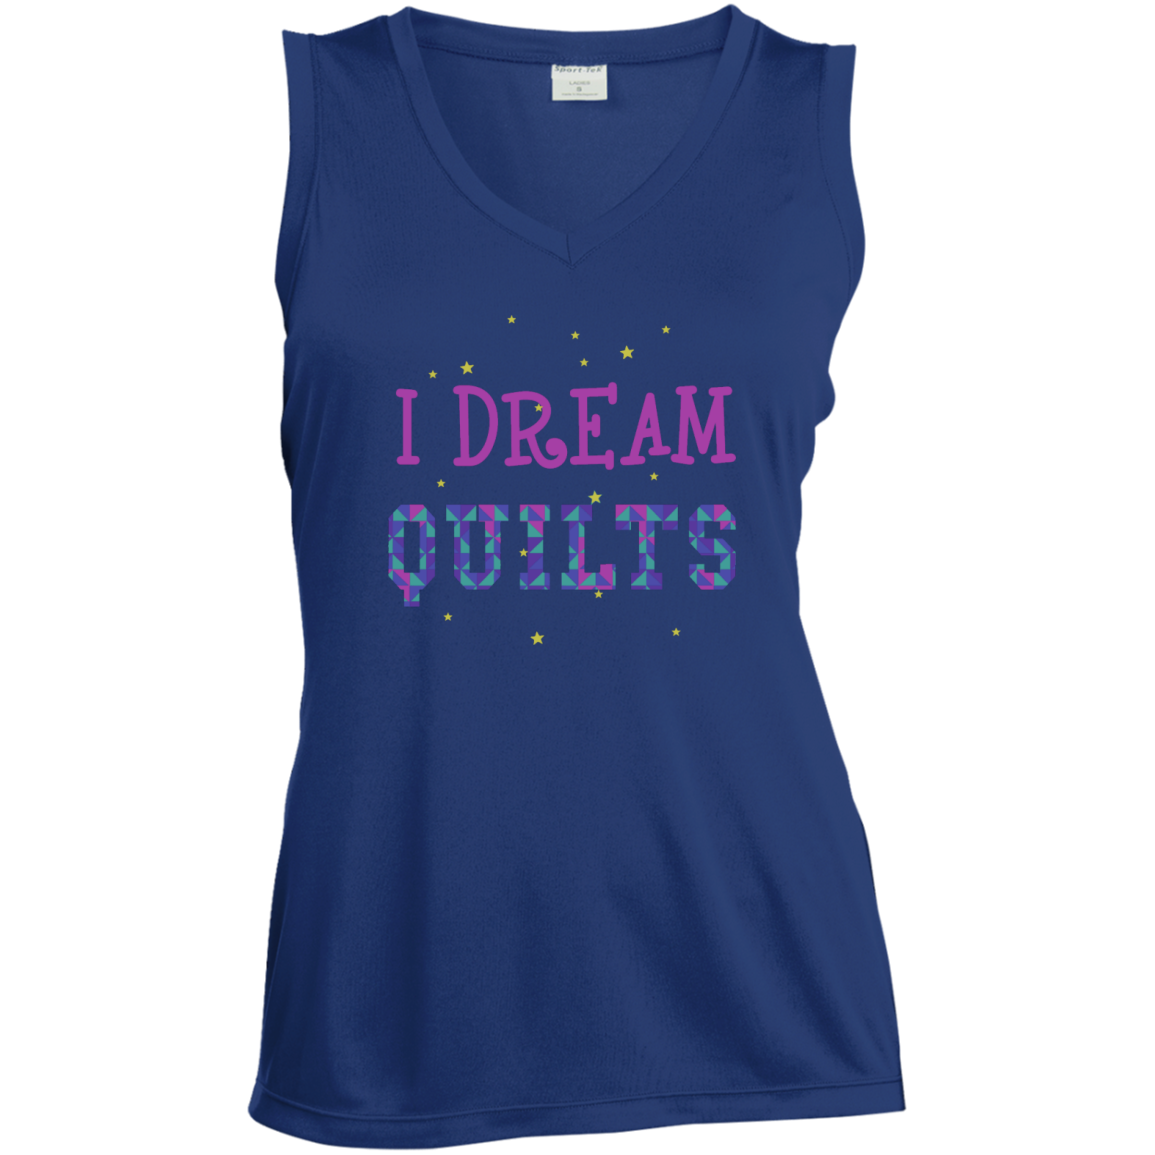 I Dream Quilts Ladies Sleeveless V-neck - Crafter4Life - 5